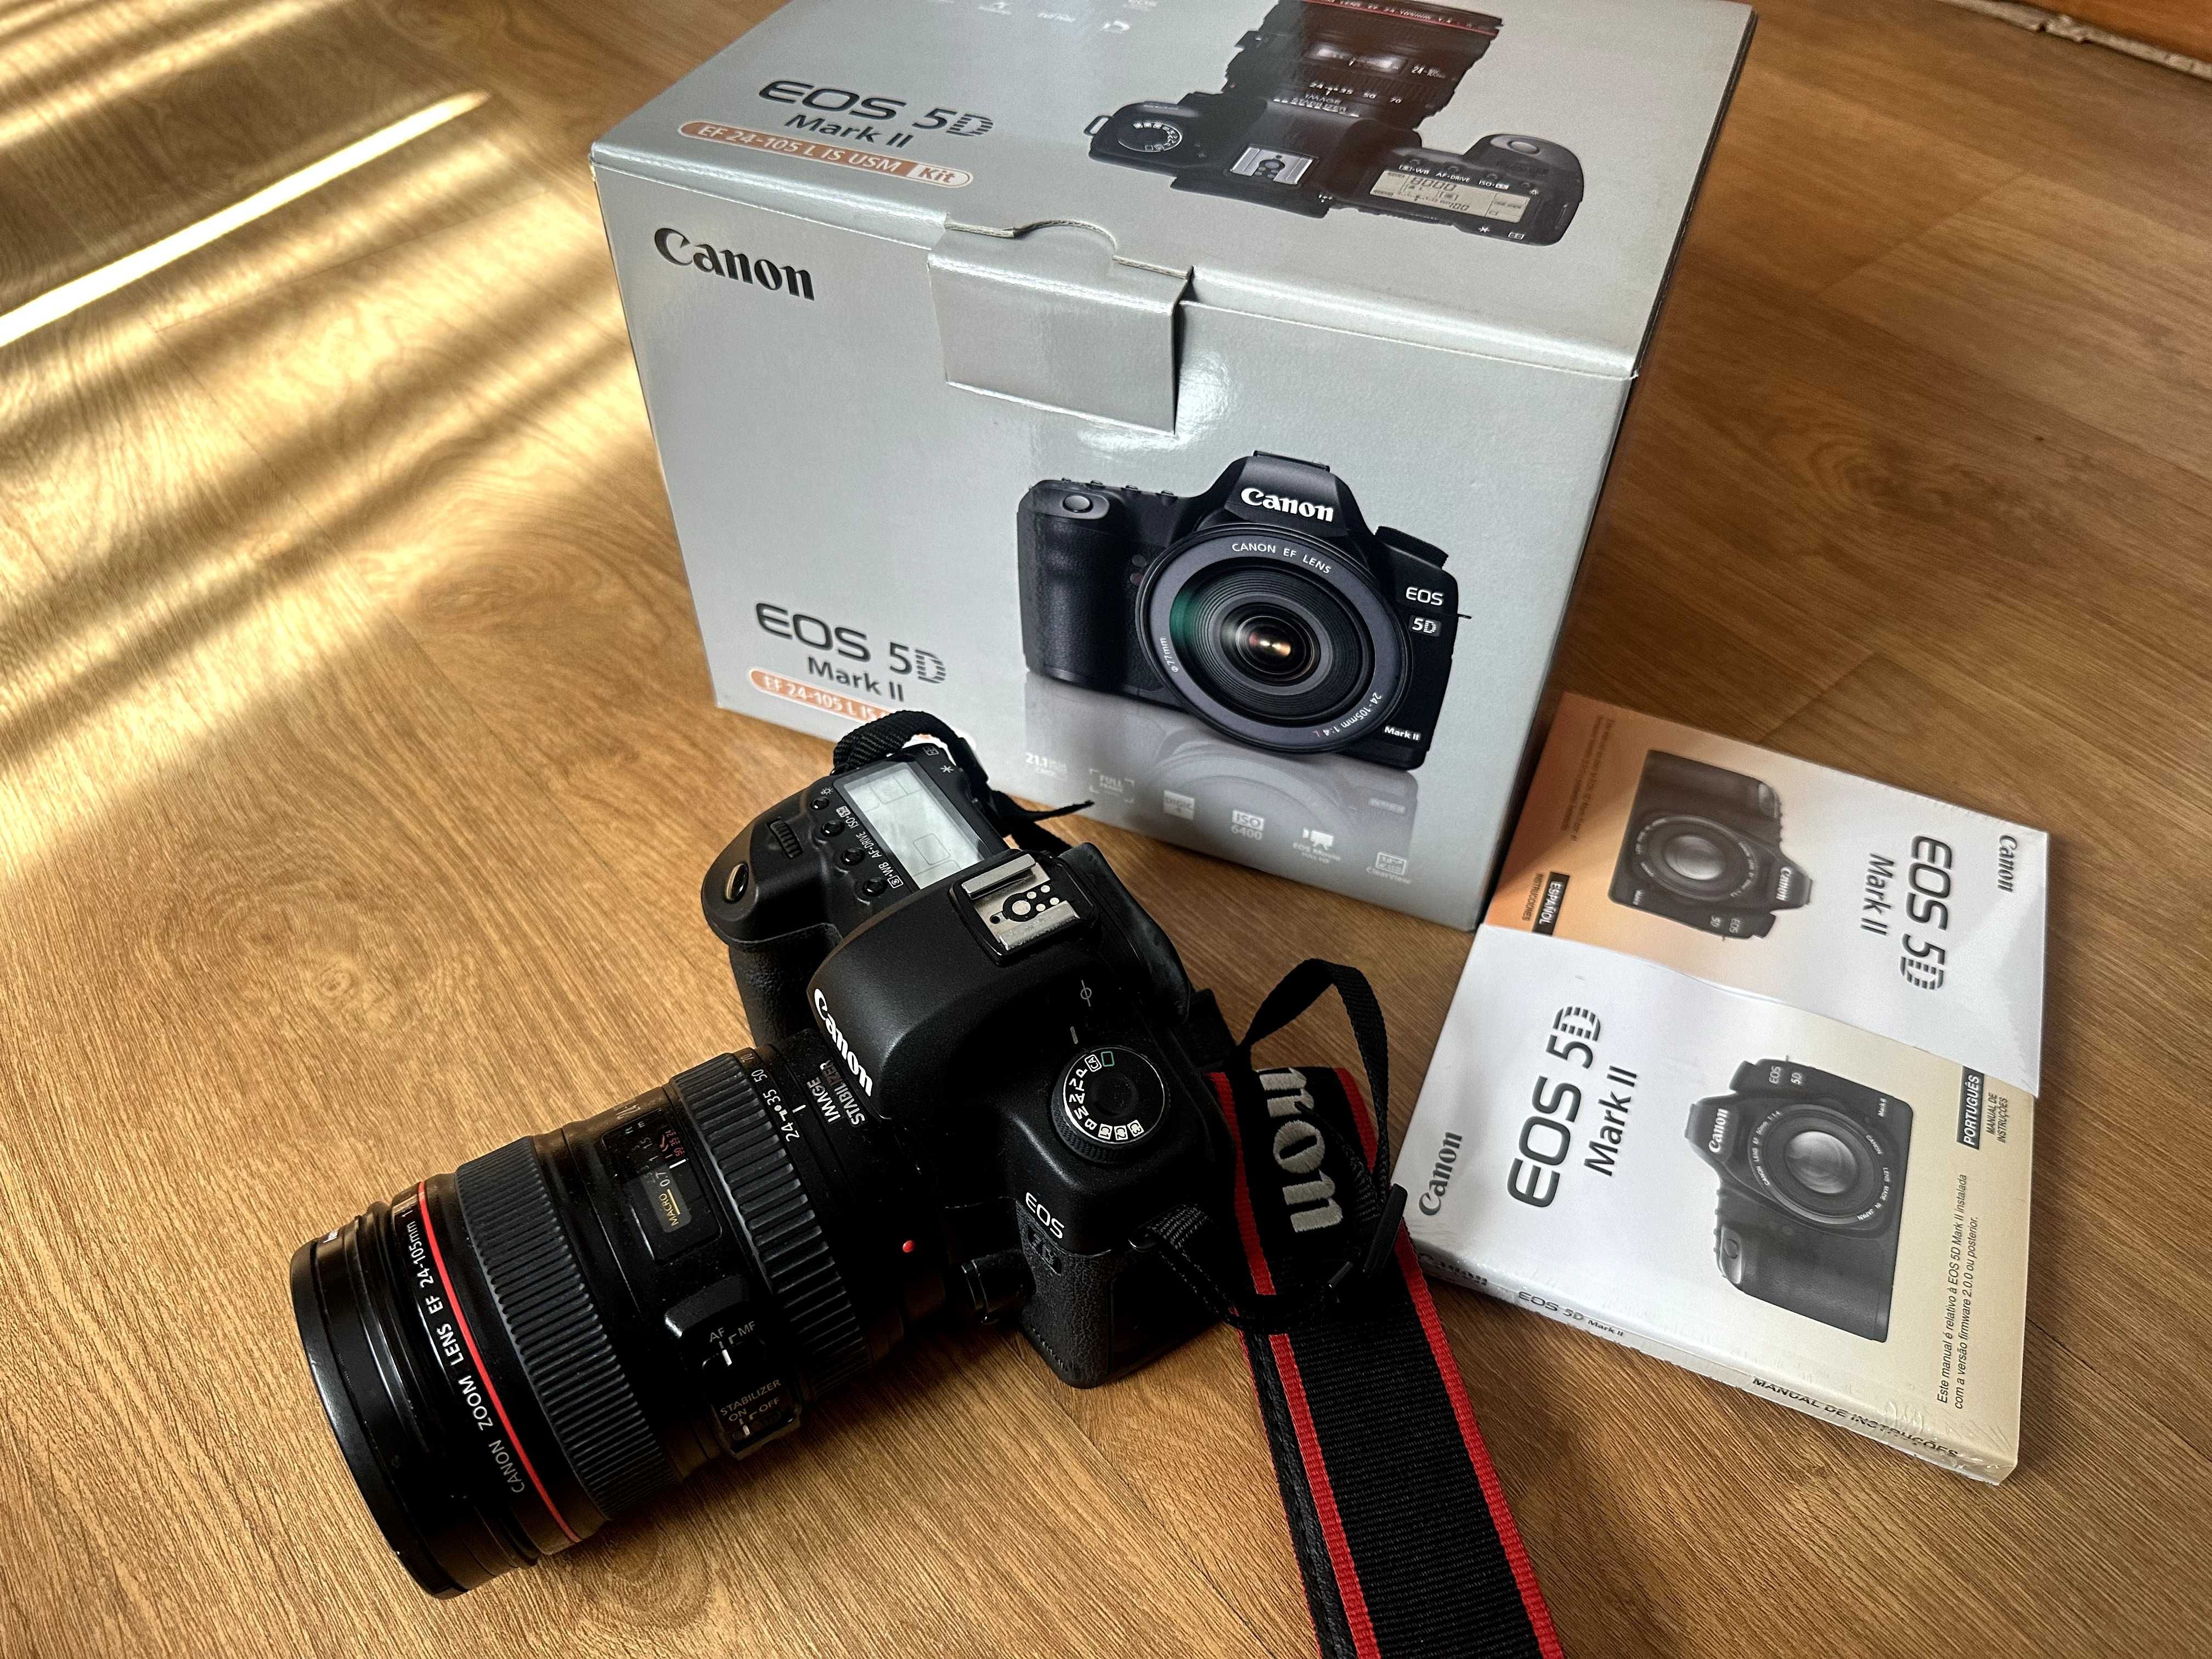 Canon 5D Mark II Kit 24-105 f/4.0 L IS USM + extras